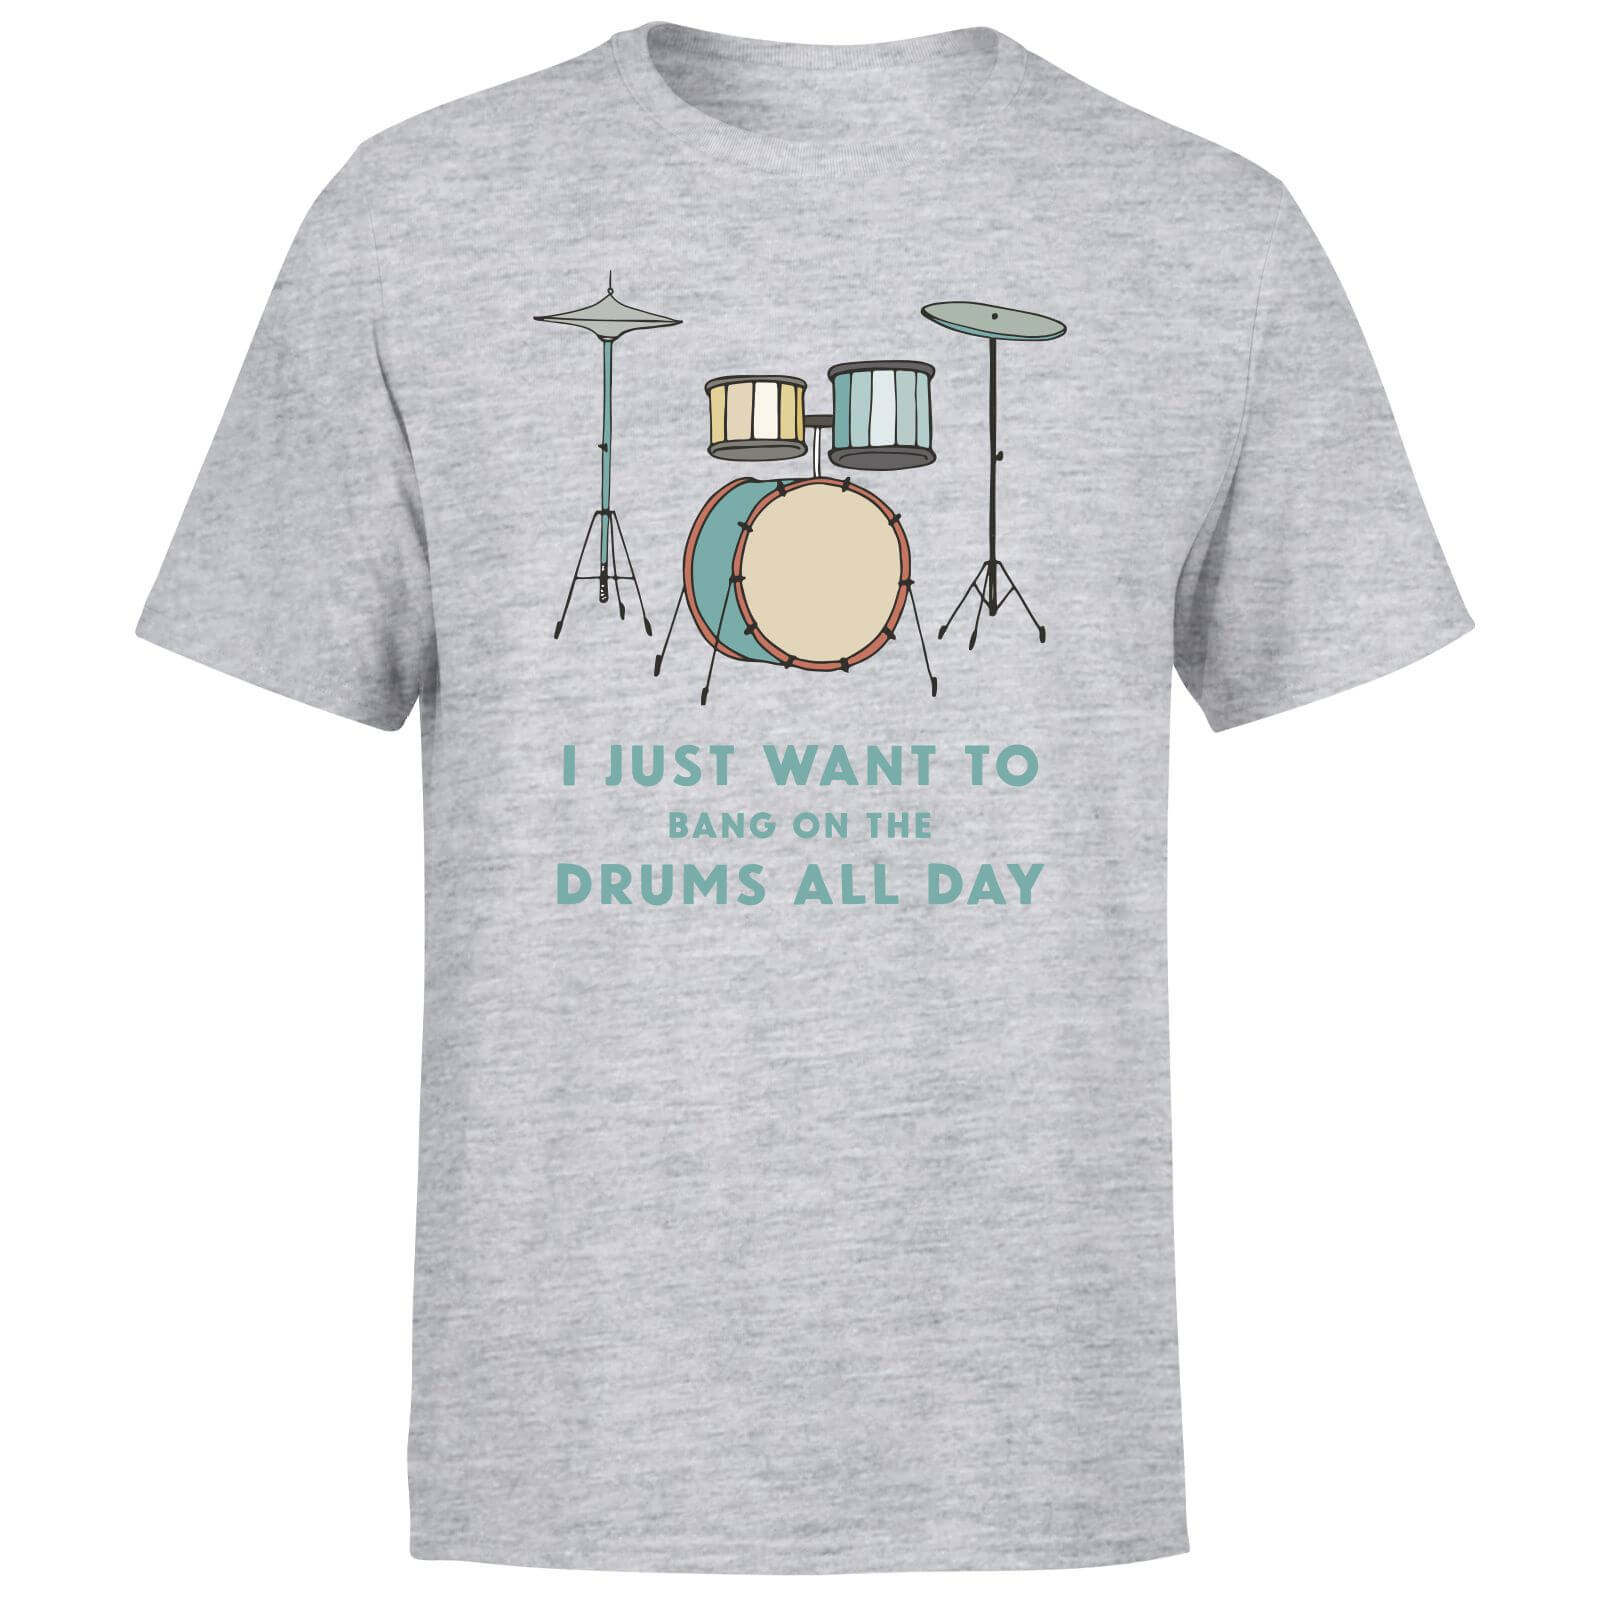 i just want to bang on the drums all day men's t-shirt - grey - xs - grey